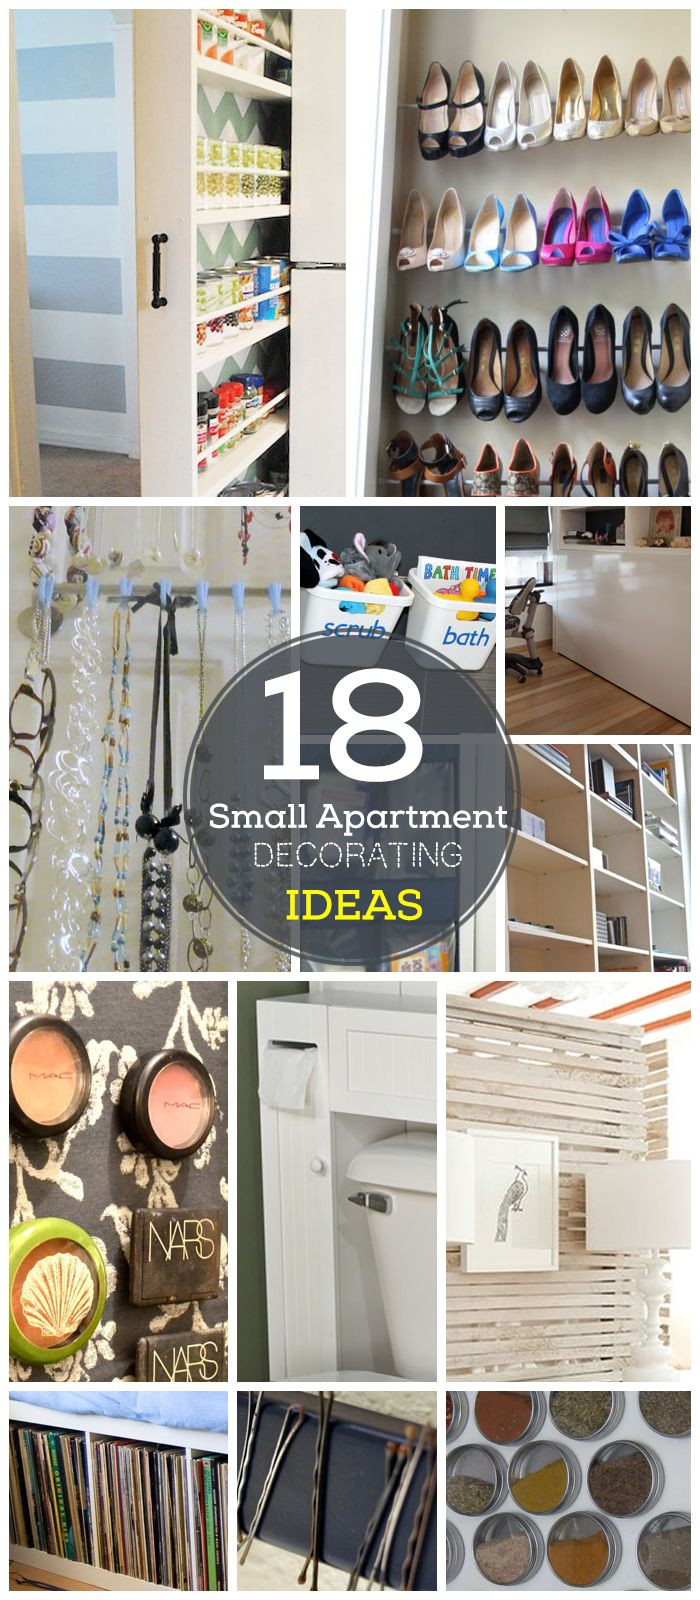 DIY Organization Ideas For Small Spaces
 18 DIY Small Apartment Decorating Ideas